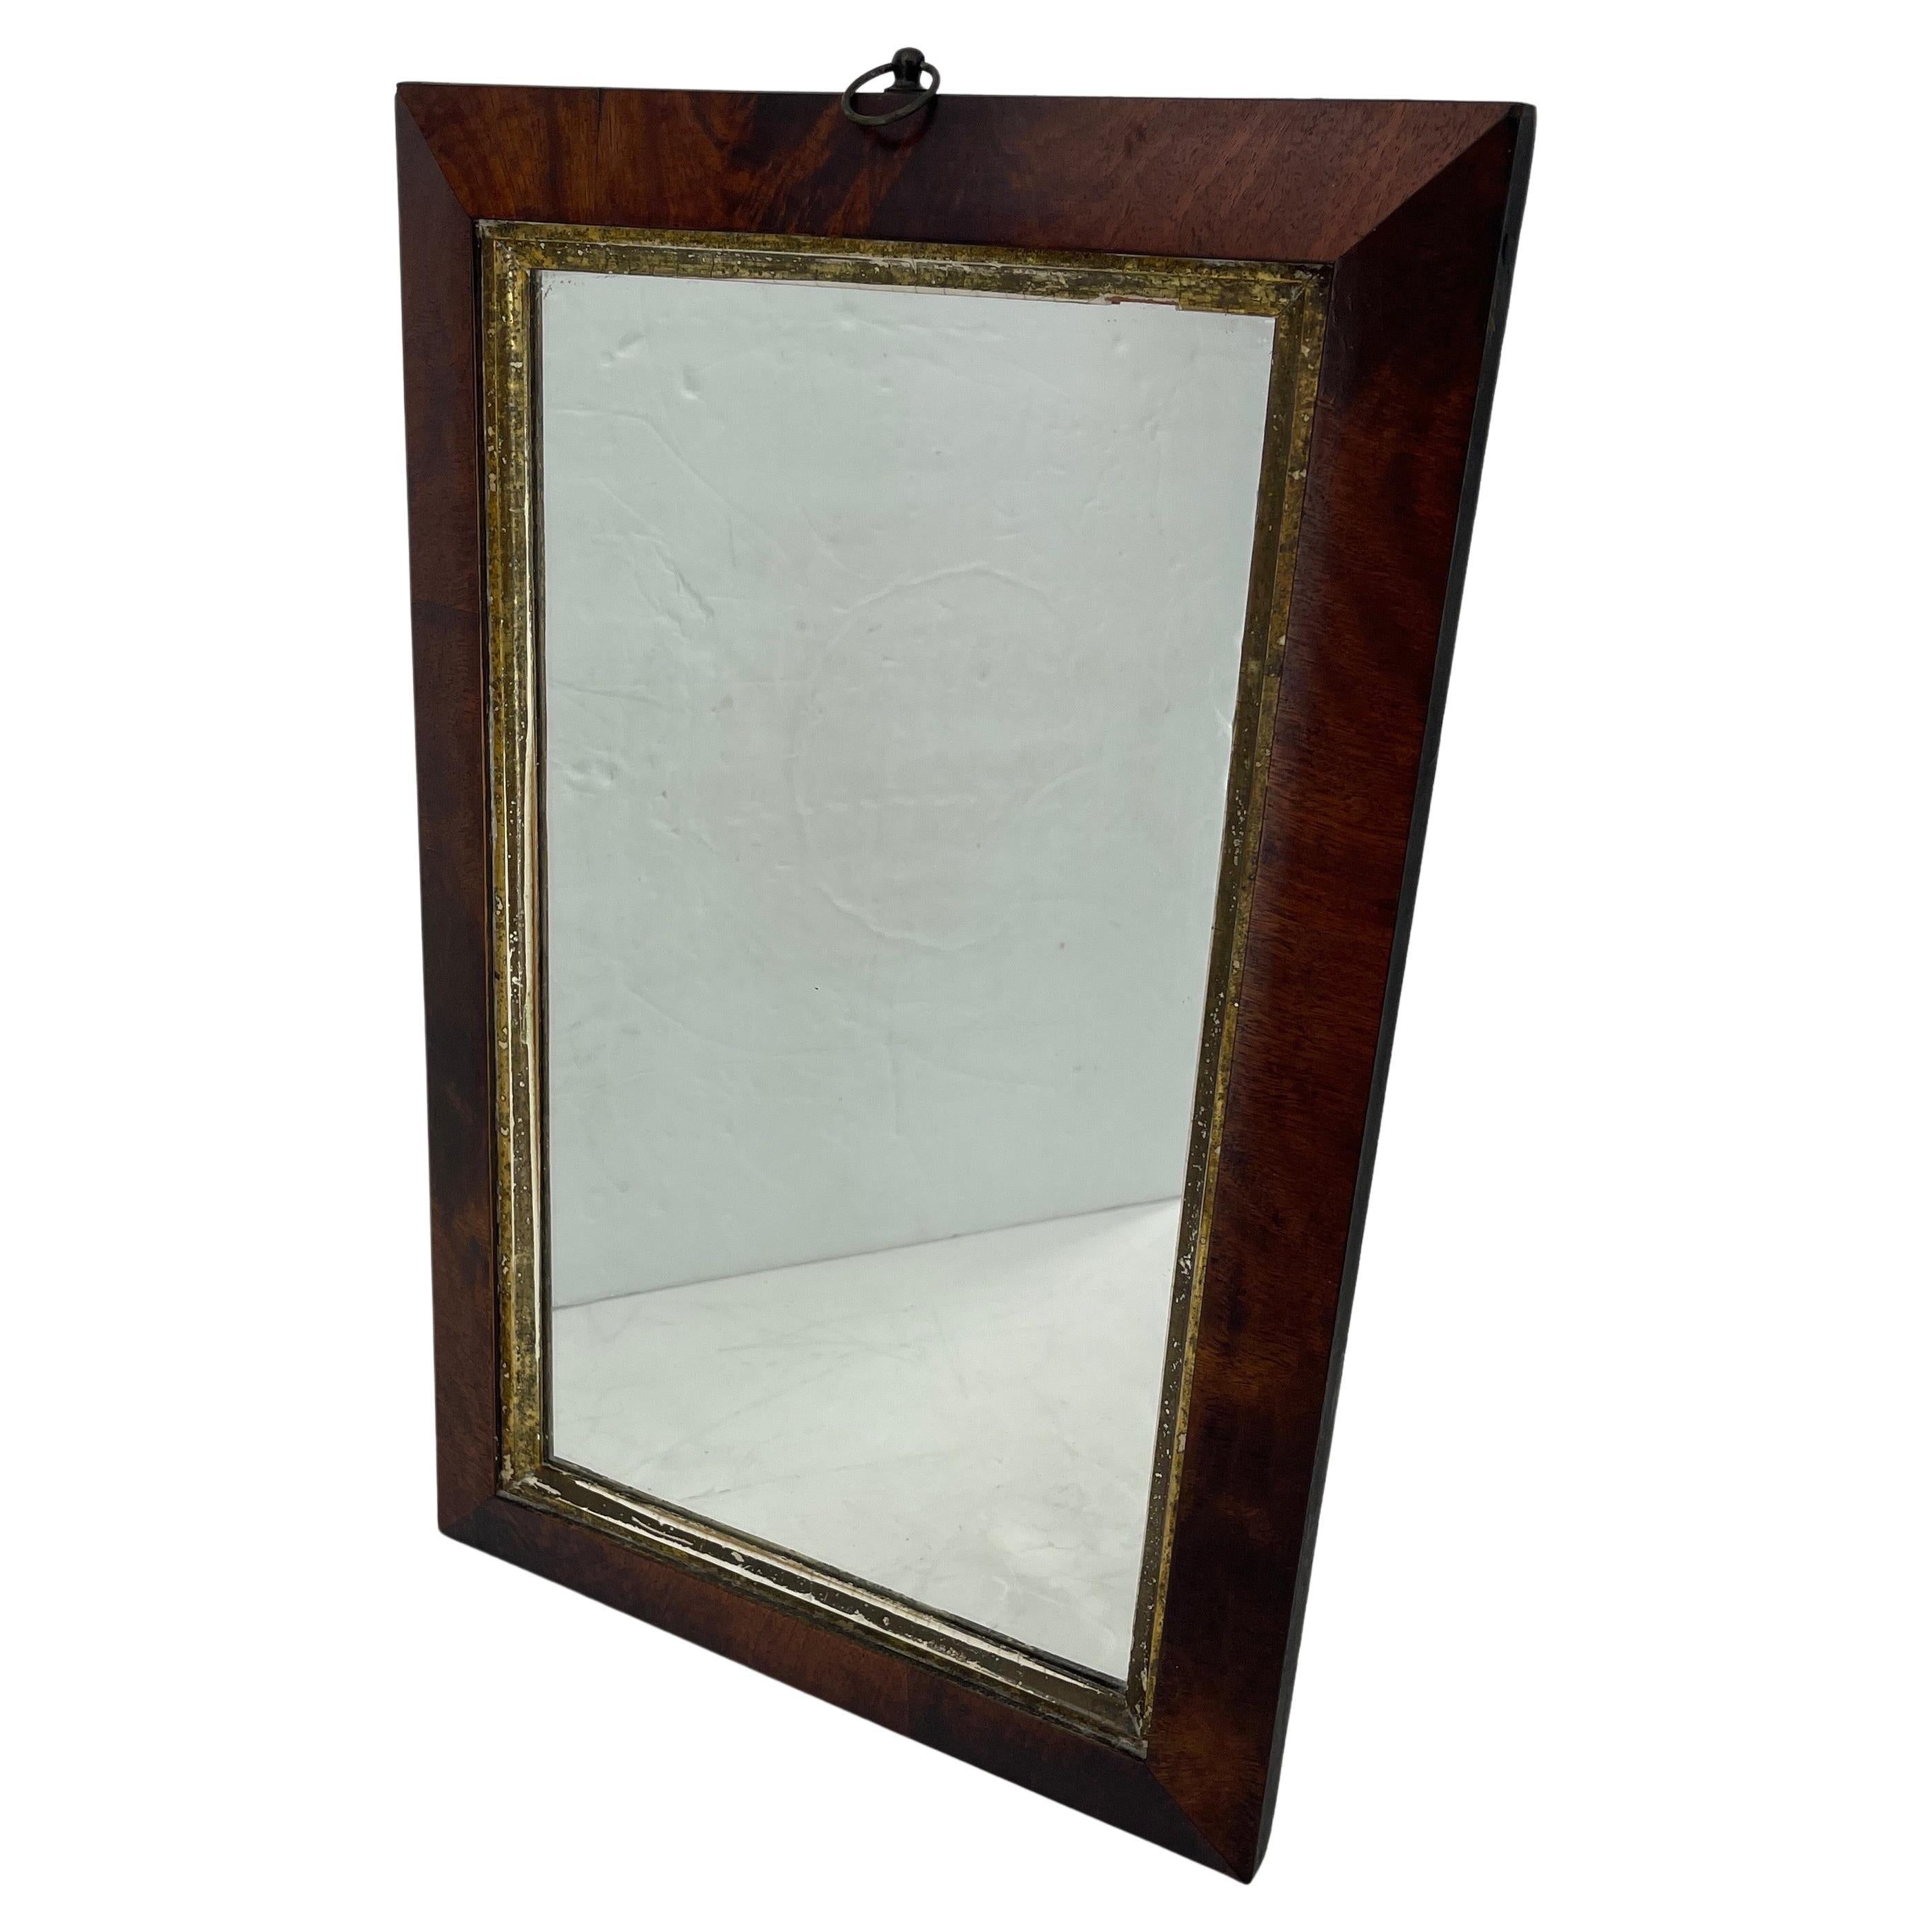 Rectangular antique wall mirror in Mahogany and gilt inner frame
This mirror is on the smaller size, but totally charming with regards to the warmth of the wood and the wear and tear to the gilt inner frame.